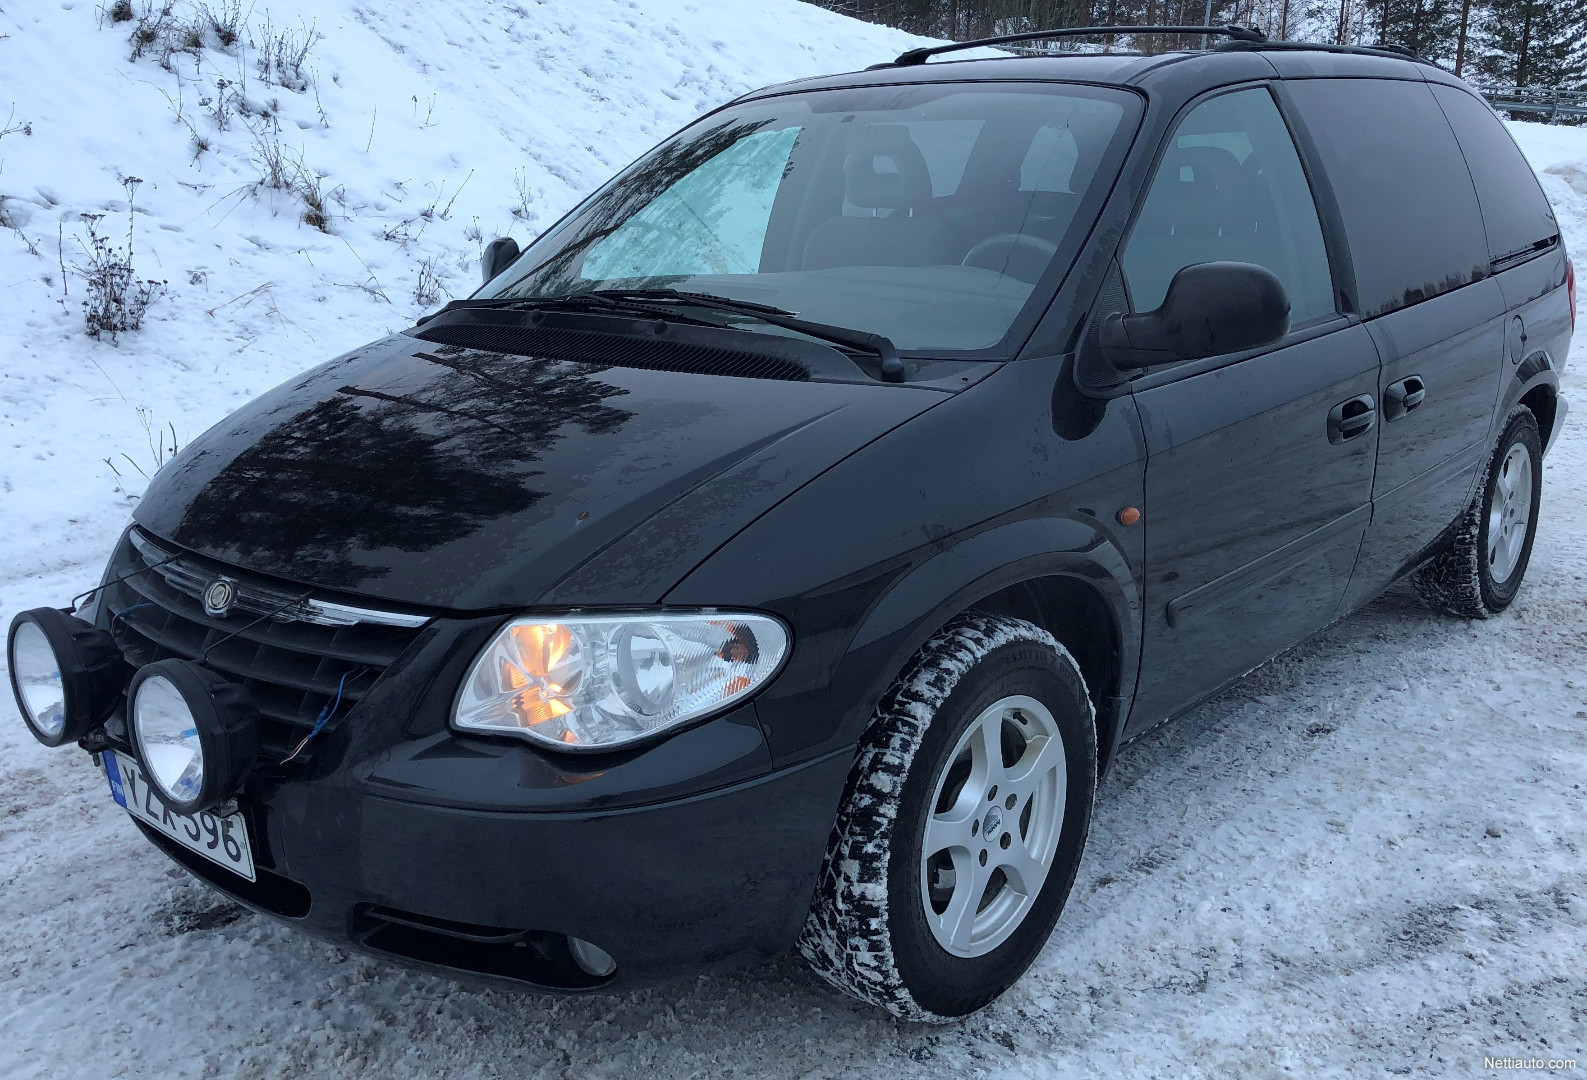 Chrysler Voyager 2.8 CRD SE Touring 5d A 7h onko nykyinen